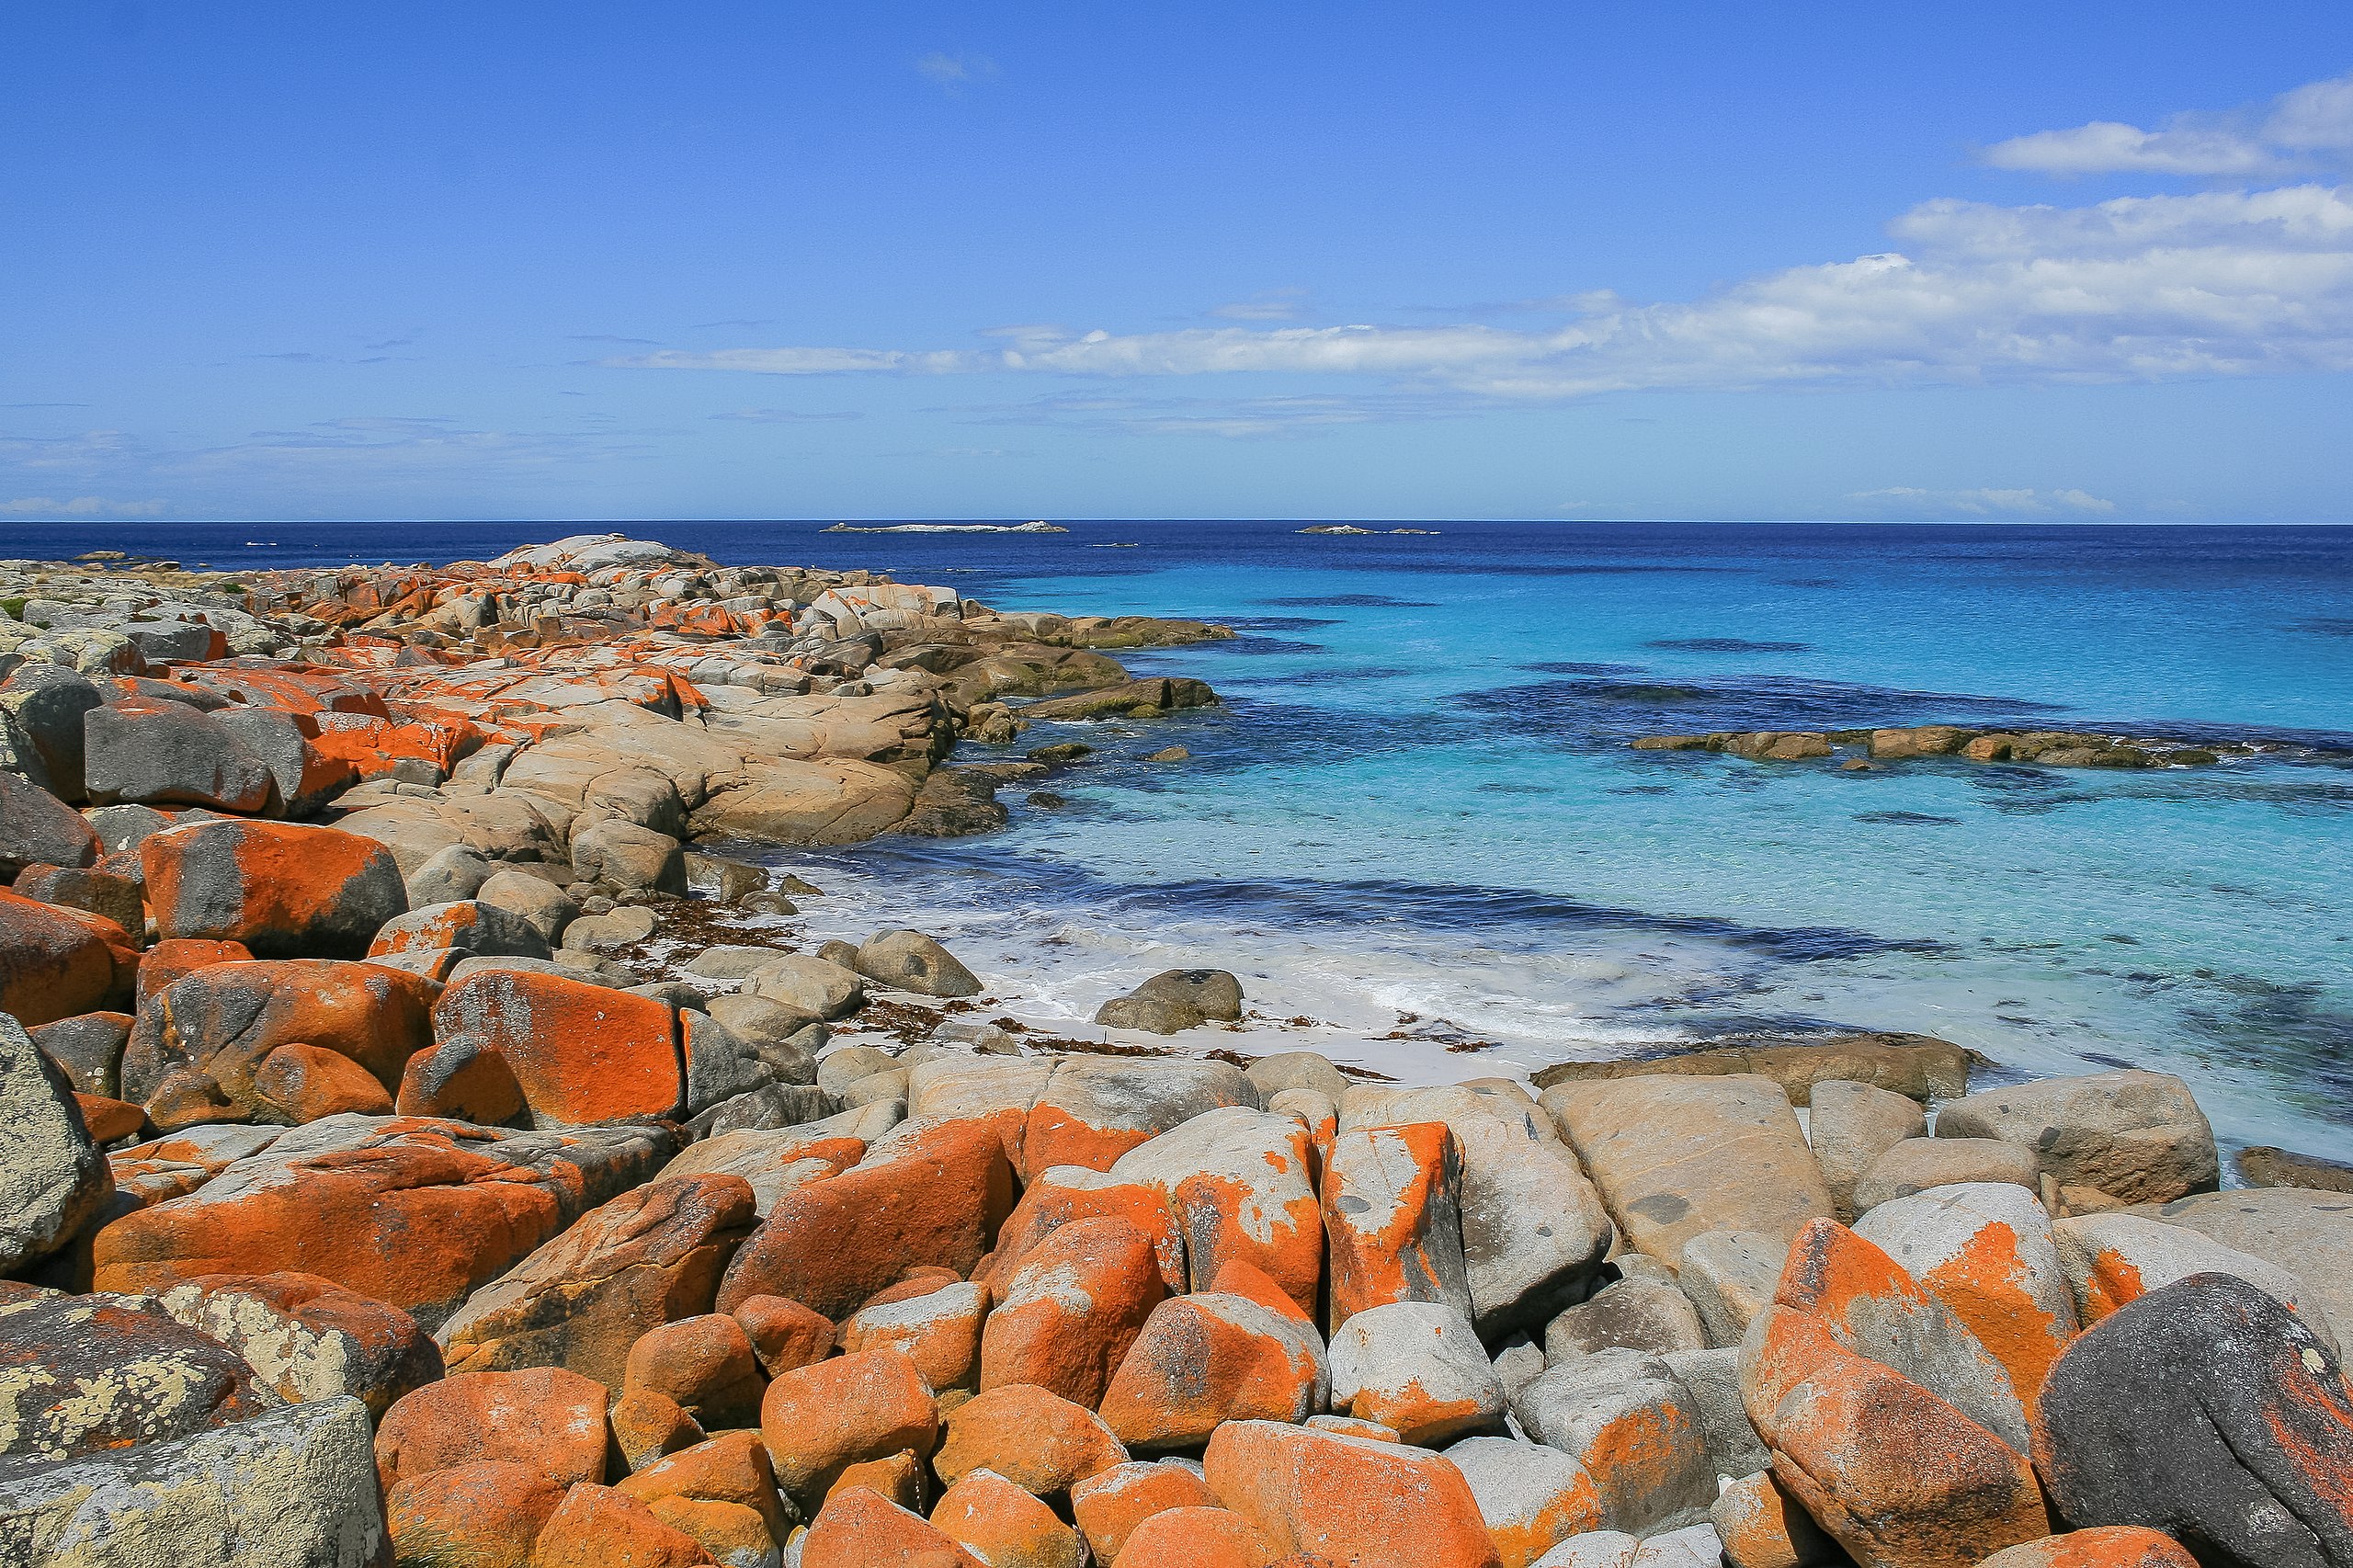 The stunning orange rocks at the Bay of Fires.